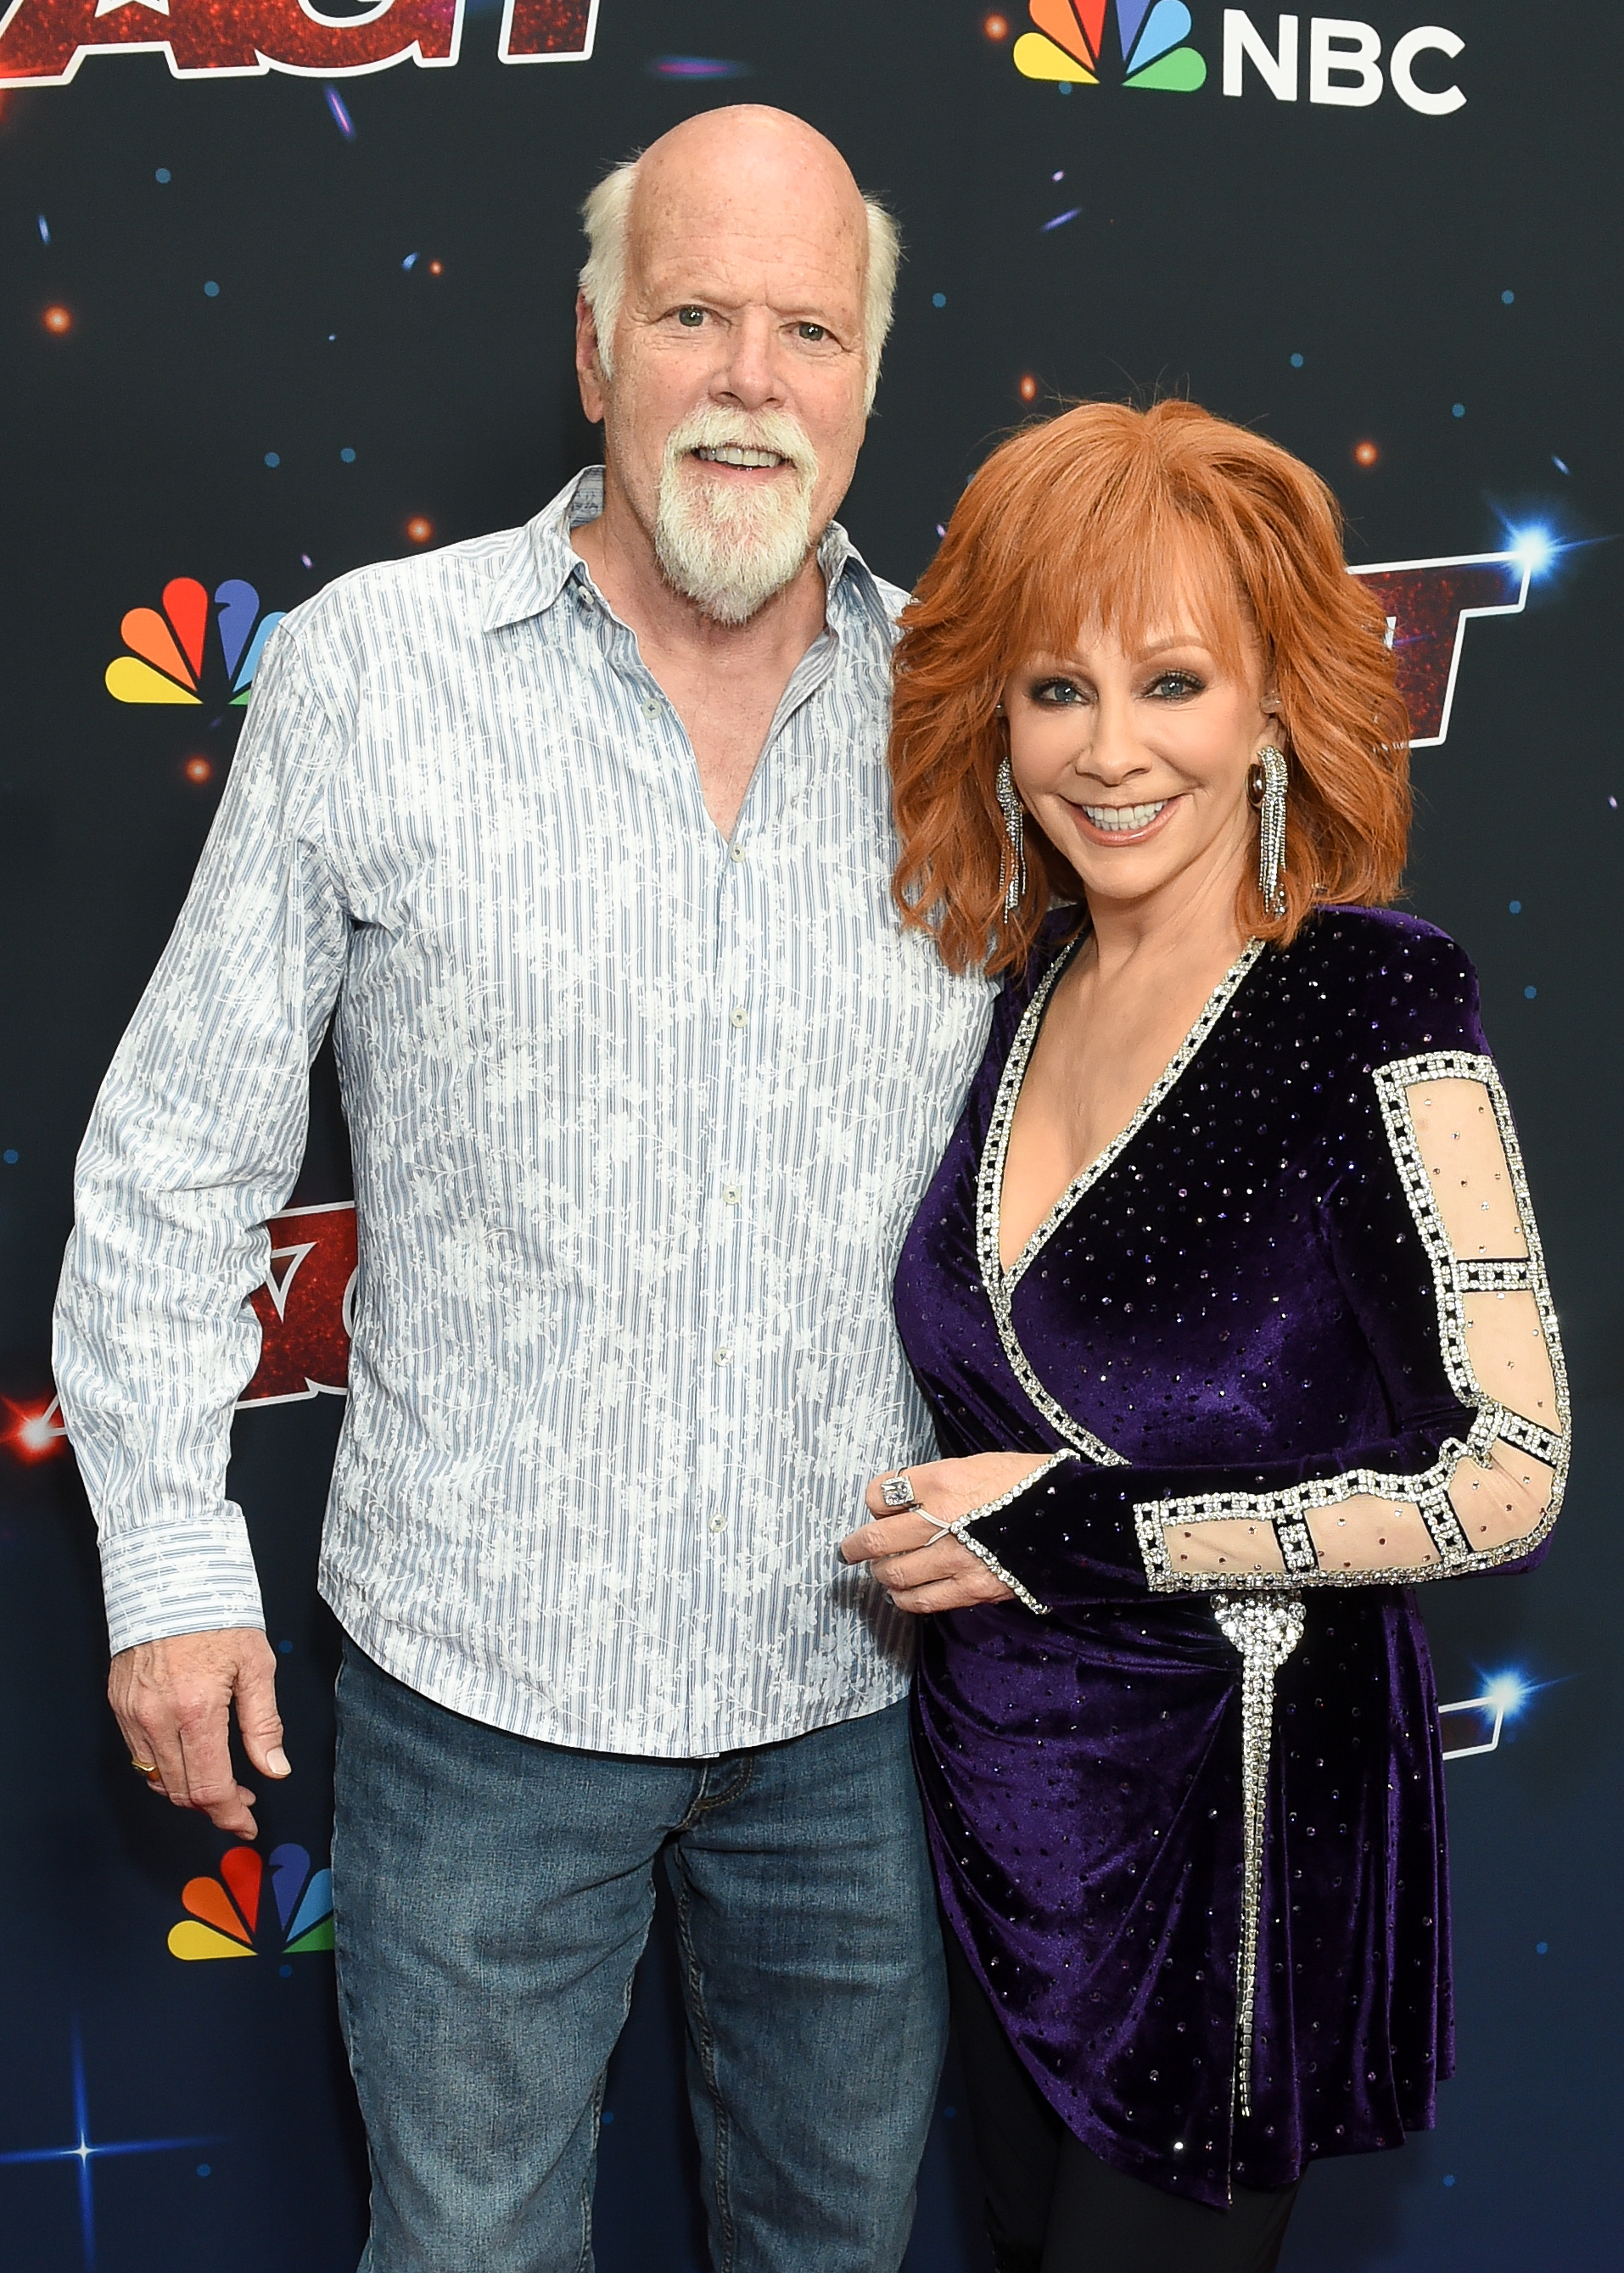 Rex Linn and Reba McEntire at the "America's Got Talent" red carpet at the Hotel Dena on September 20, 2023 in Pasadena, California. | Source: Getty Images